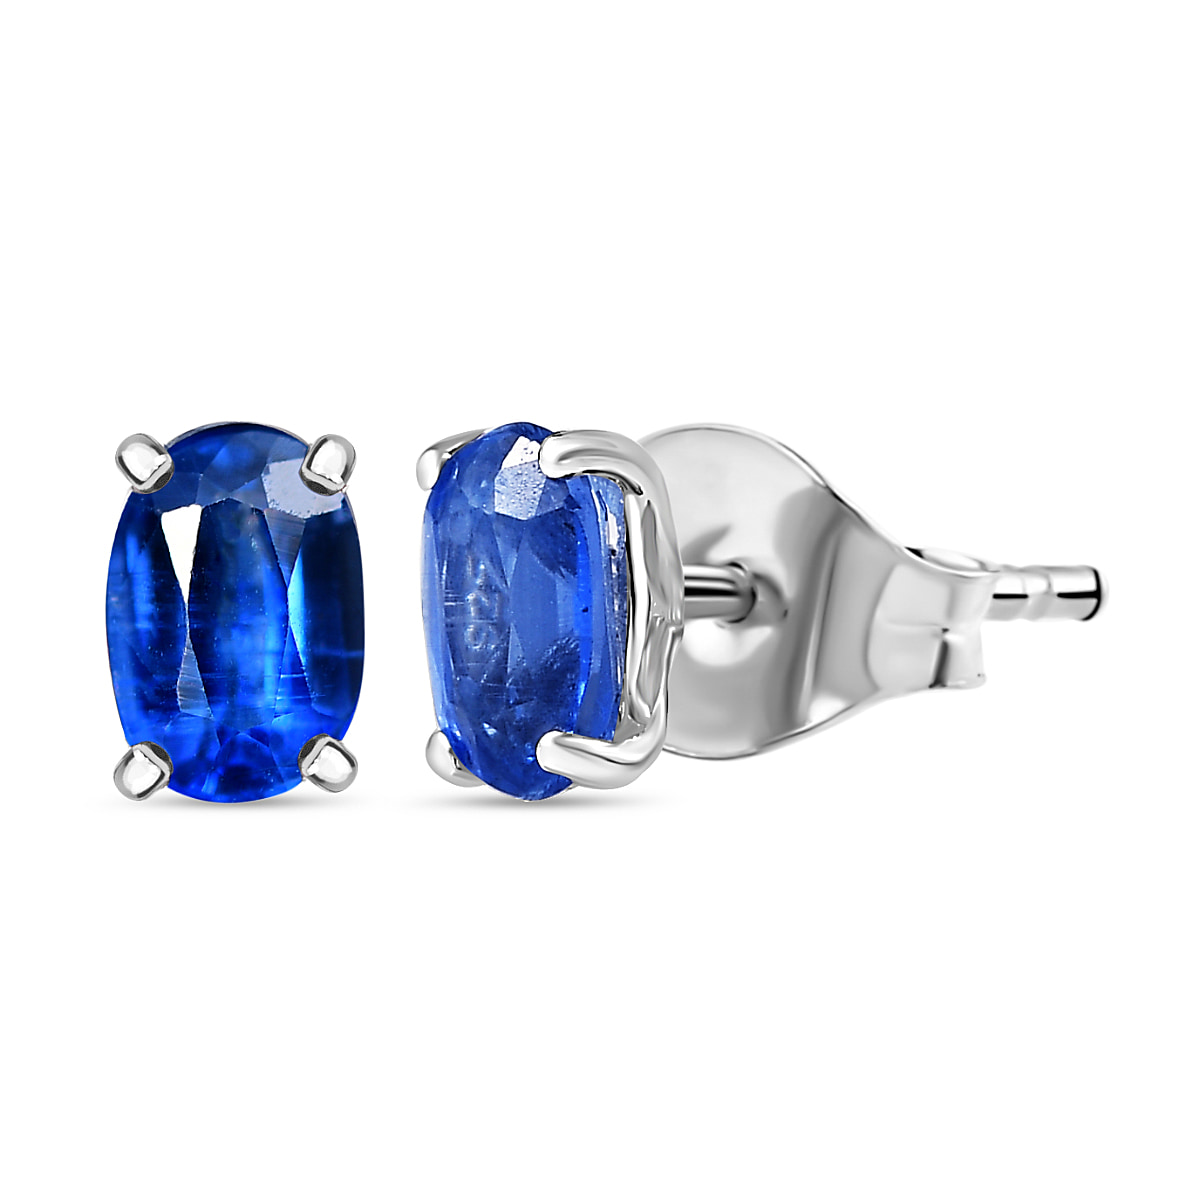 Natural Himalayan Kyanite Solitaire Stud Earrings in Platinum Overlay Sterling Silver 1.26 Ct.